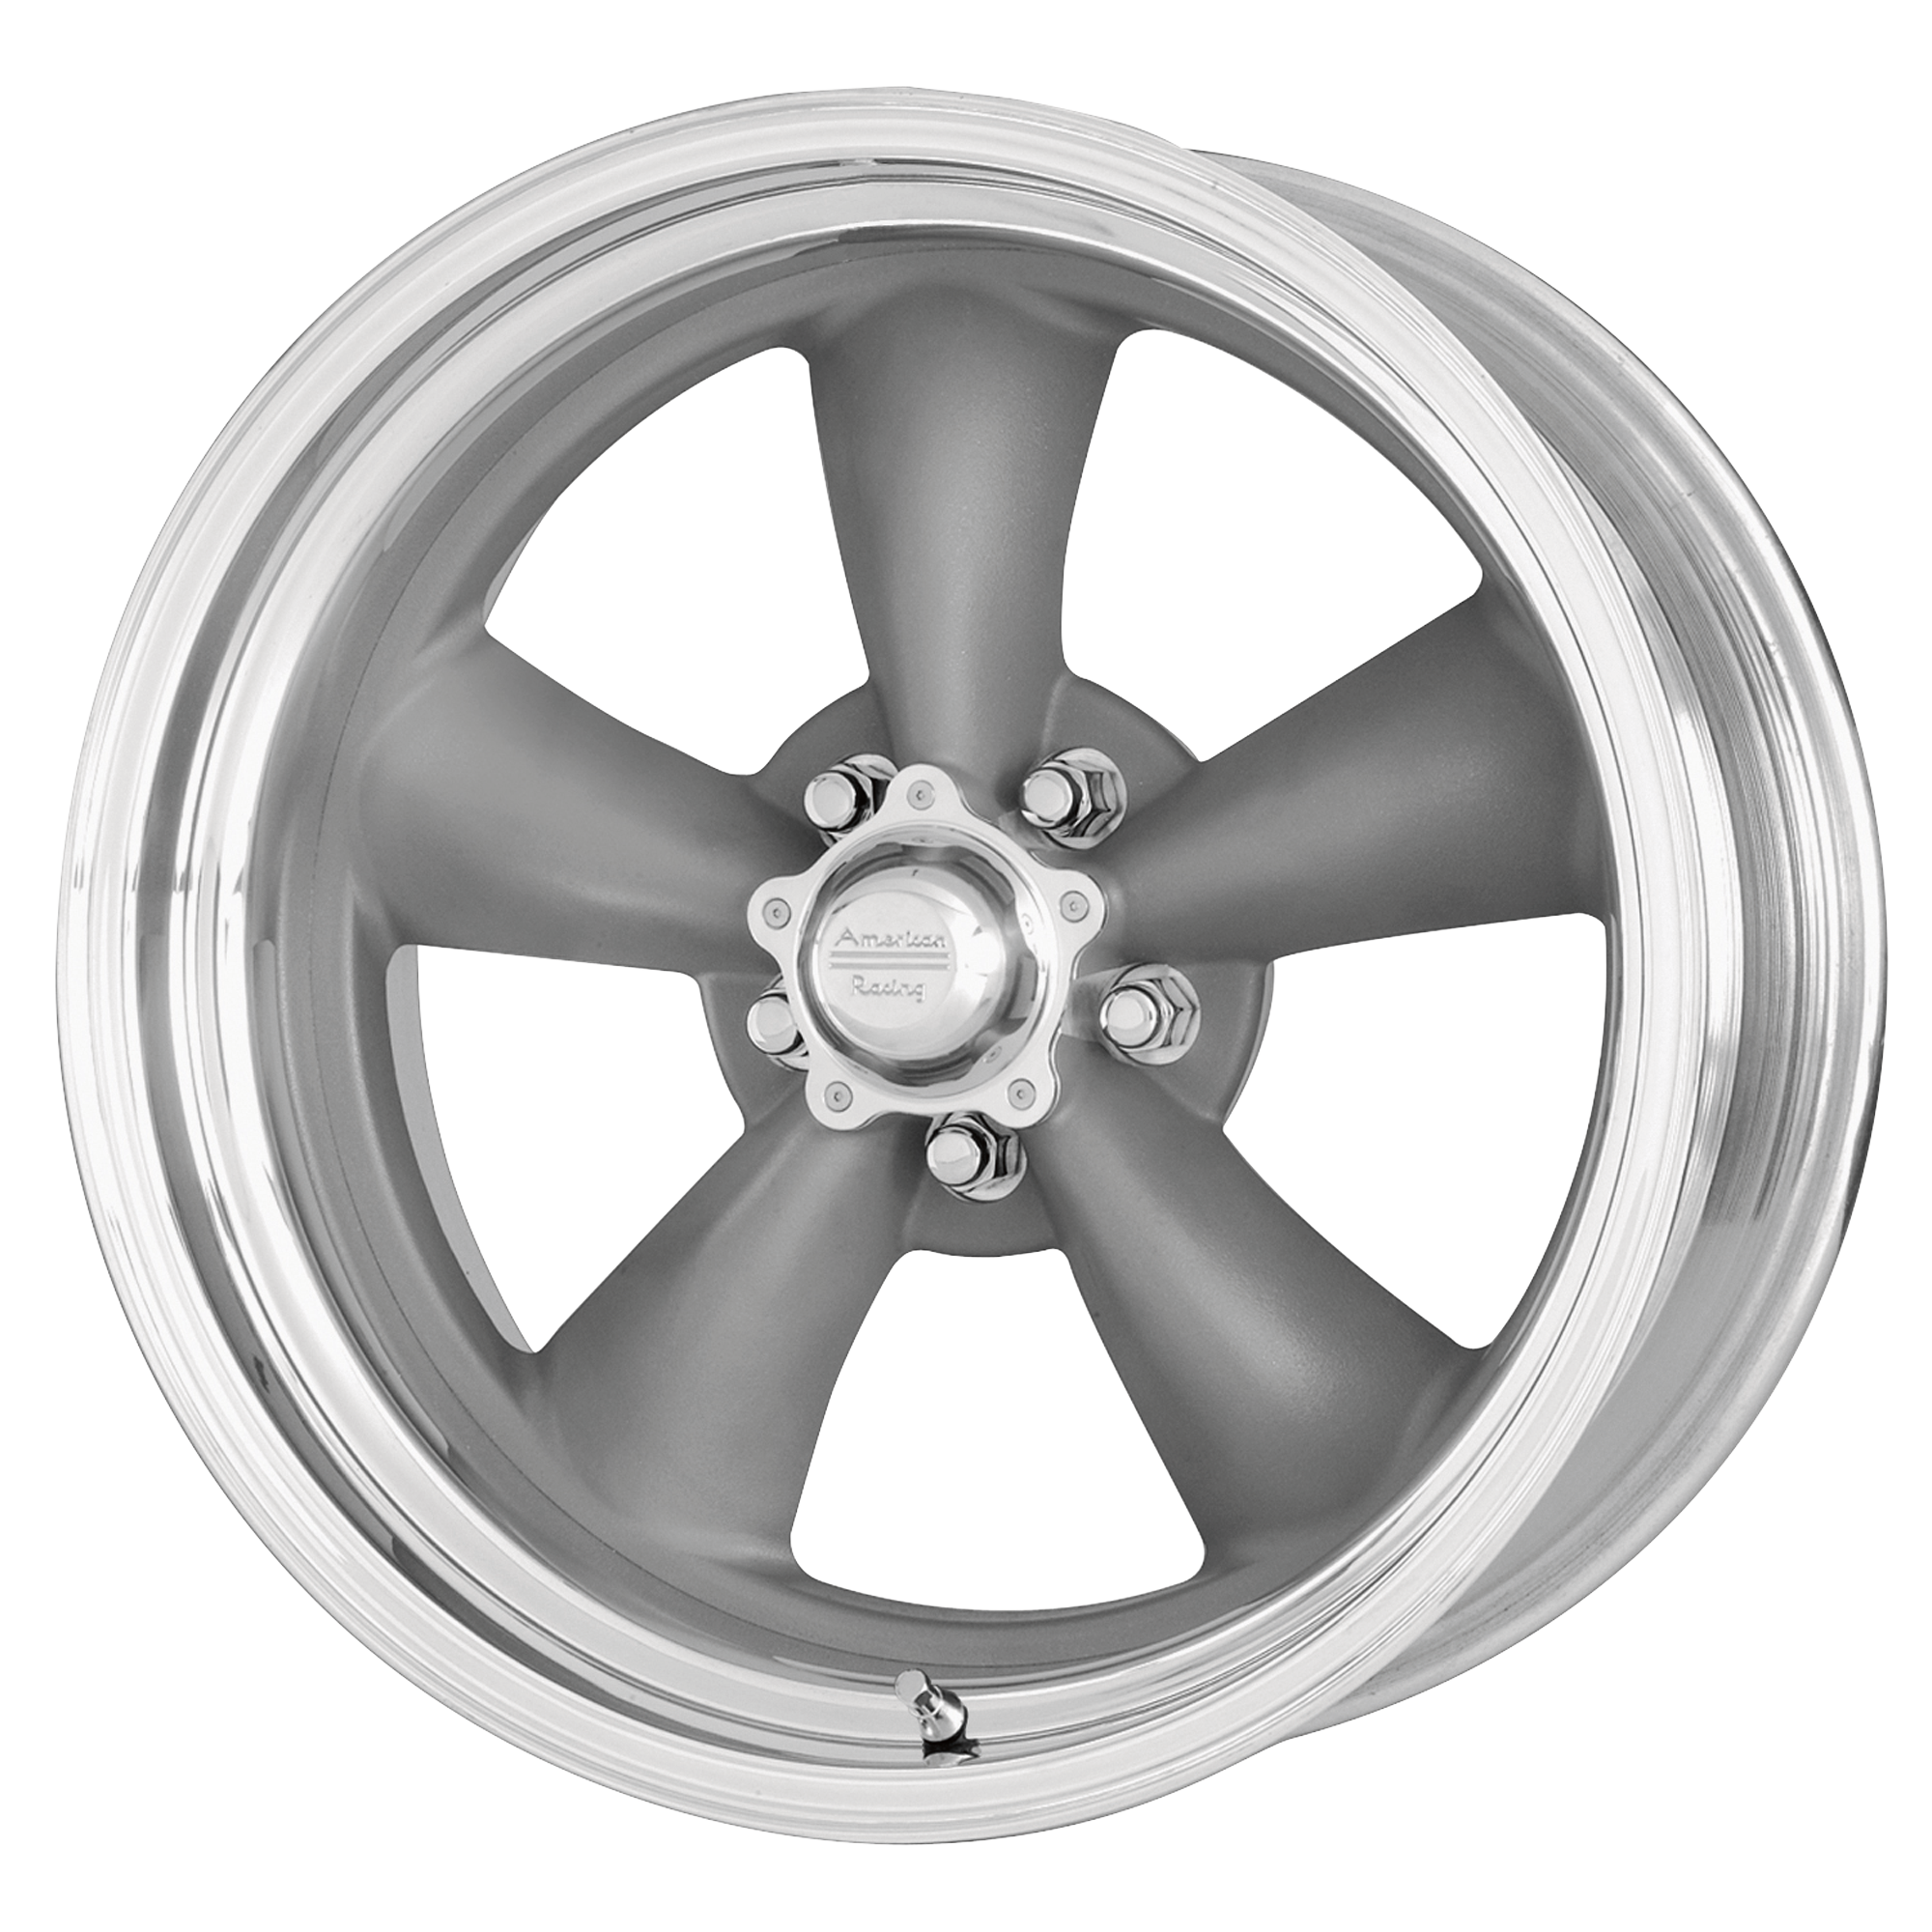 CLASSIC TORQ THRUST II ONE PIECE 15x4 5x114.30 MAG GRAY W/ MACHINED LIP (-25 mm) - Tires and Engine Performance